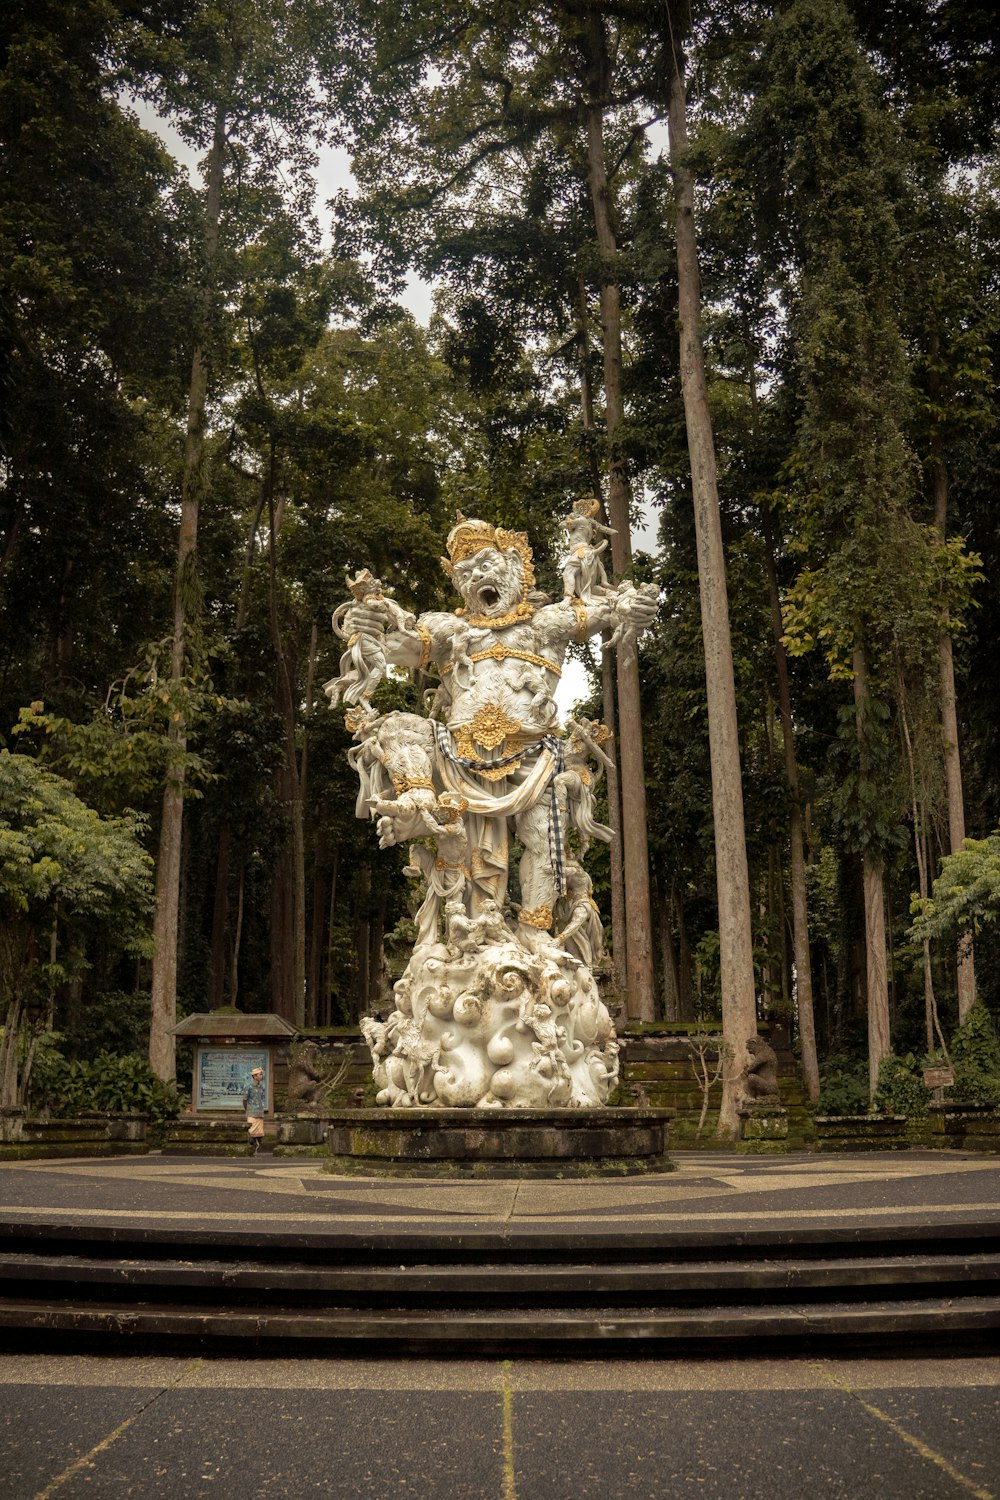 a statue in the middle of a park surrounded by trees